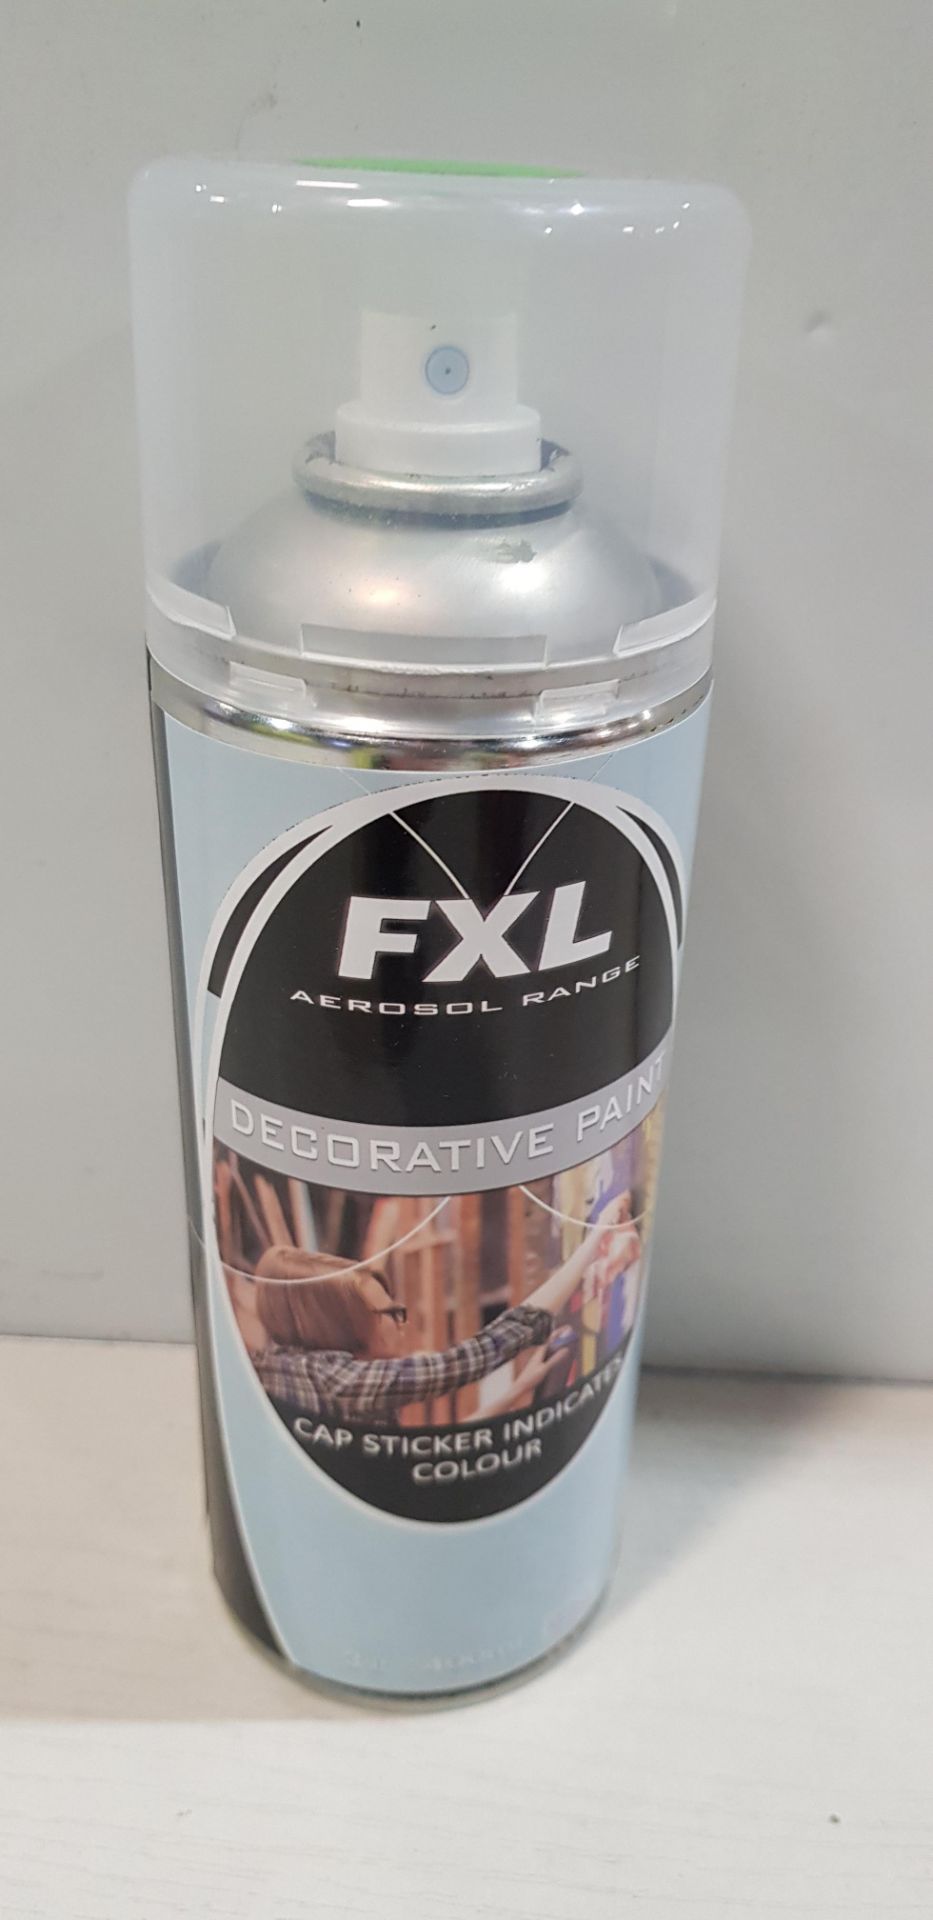 144 XBRAND NEW FXL DECORATIVE PAINT 520 -400ML- GREEN